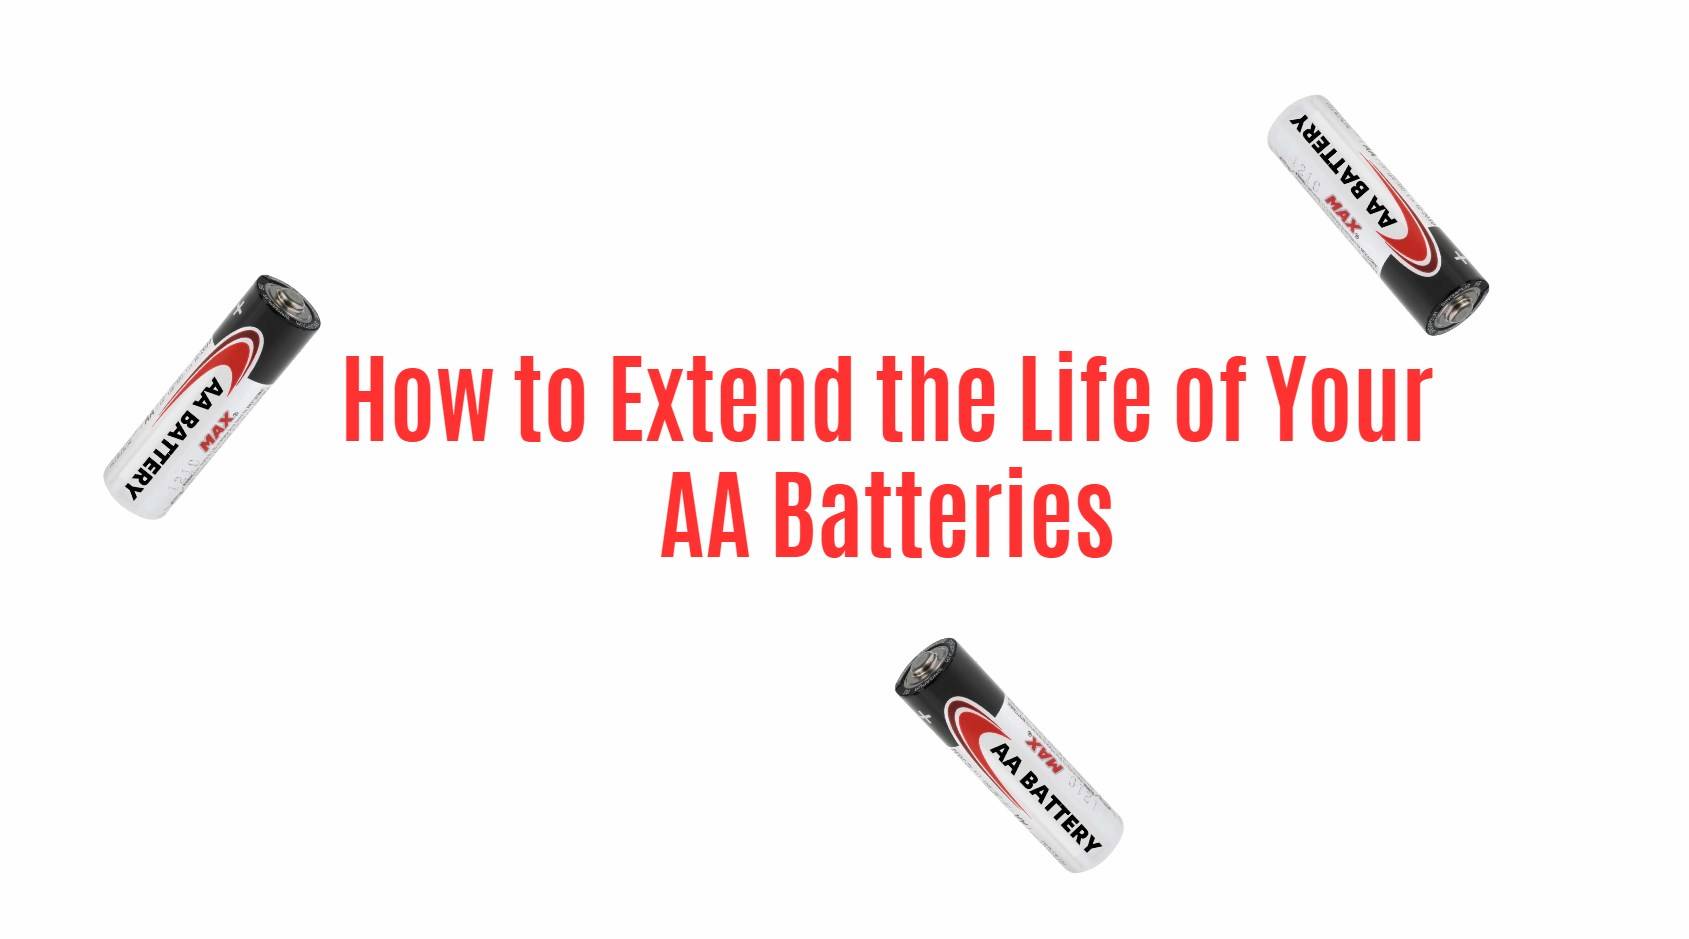 How to Extend the Life of Your AA Batteries